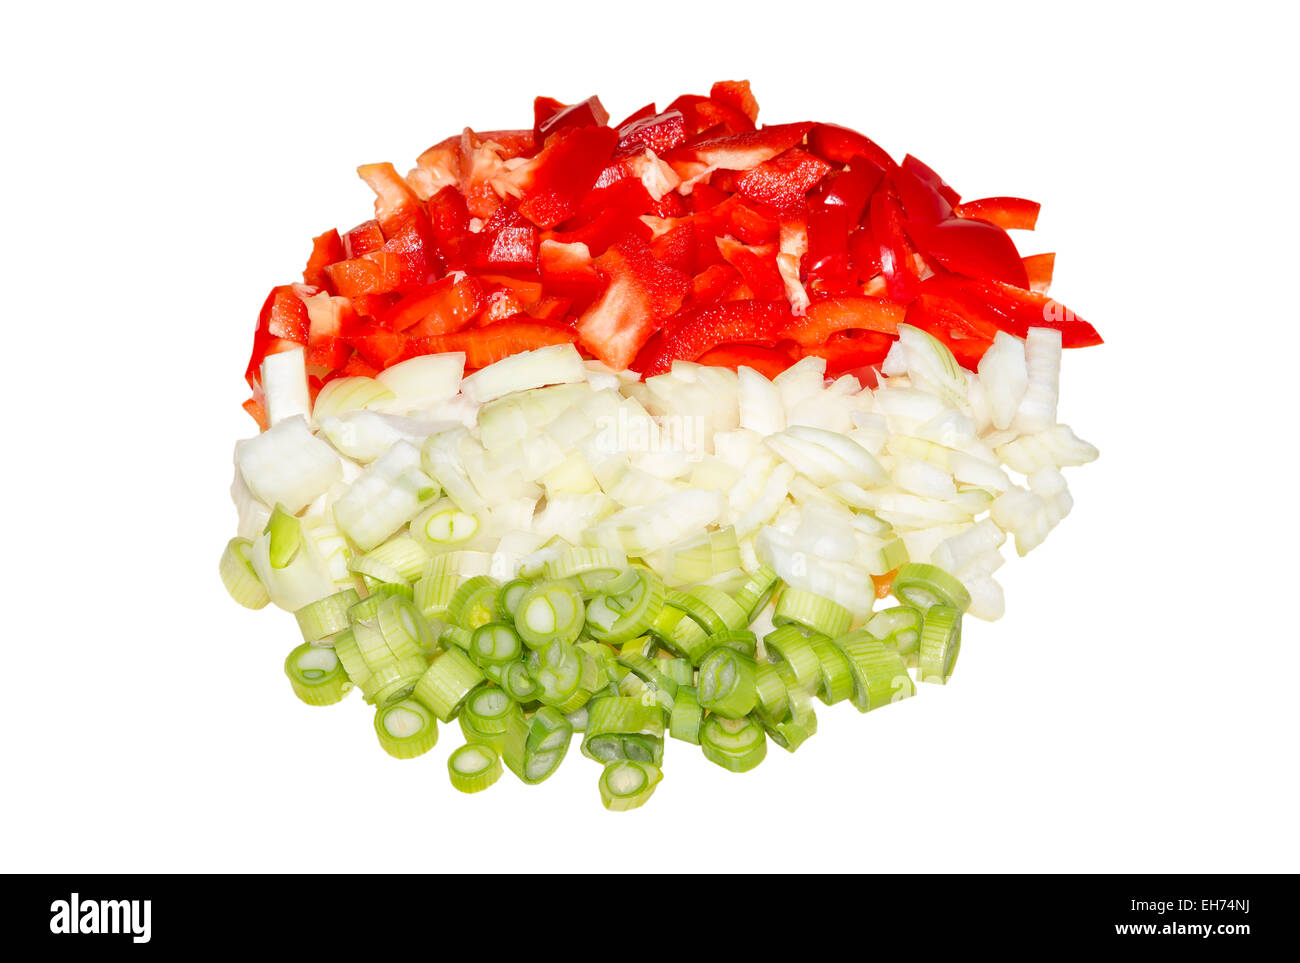 Picture of chopped paprika, onions, and spring onions Stock Photo